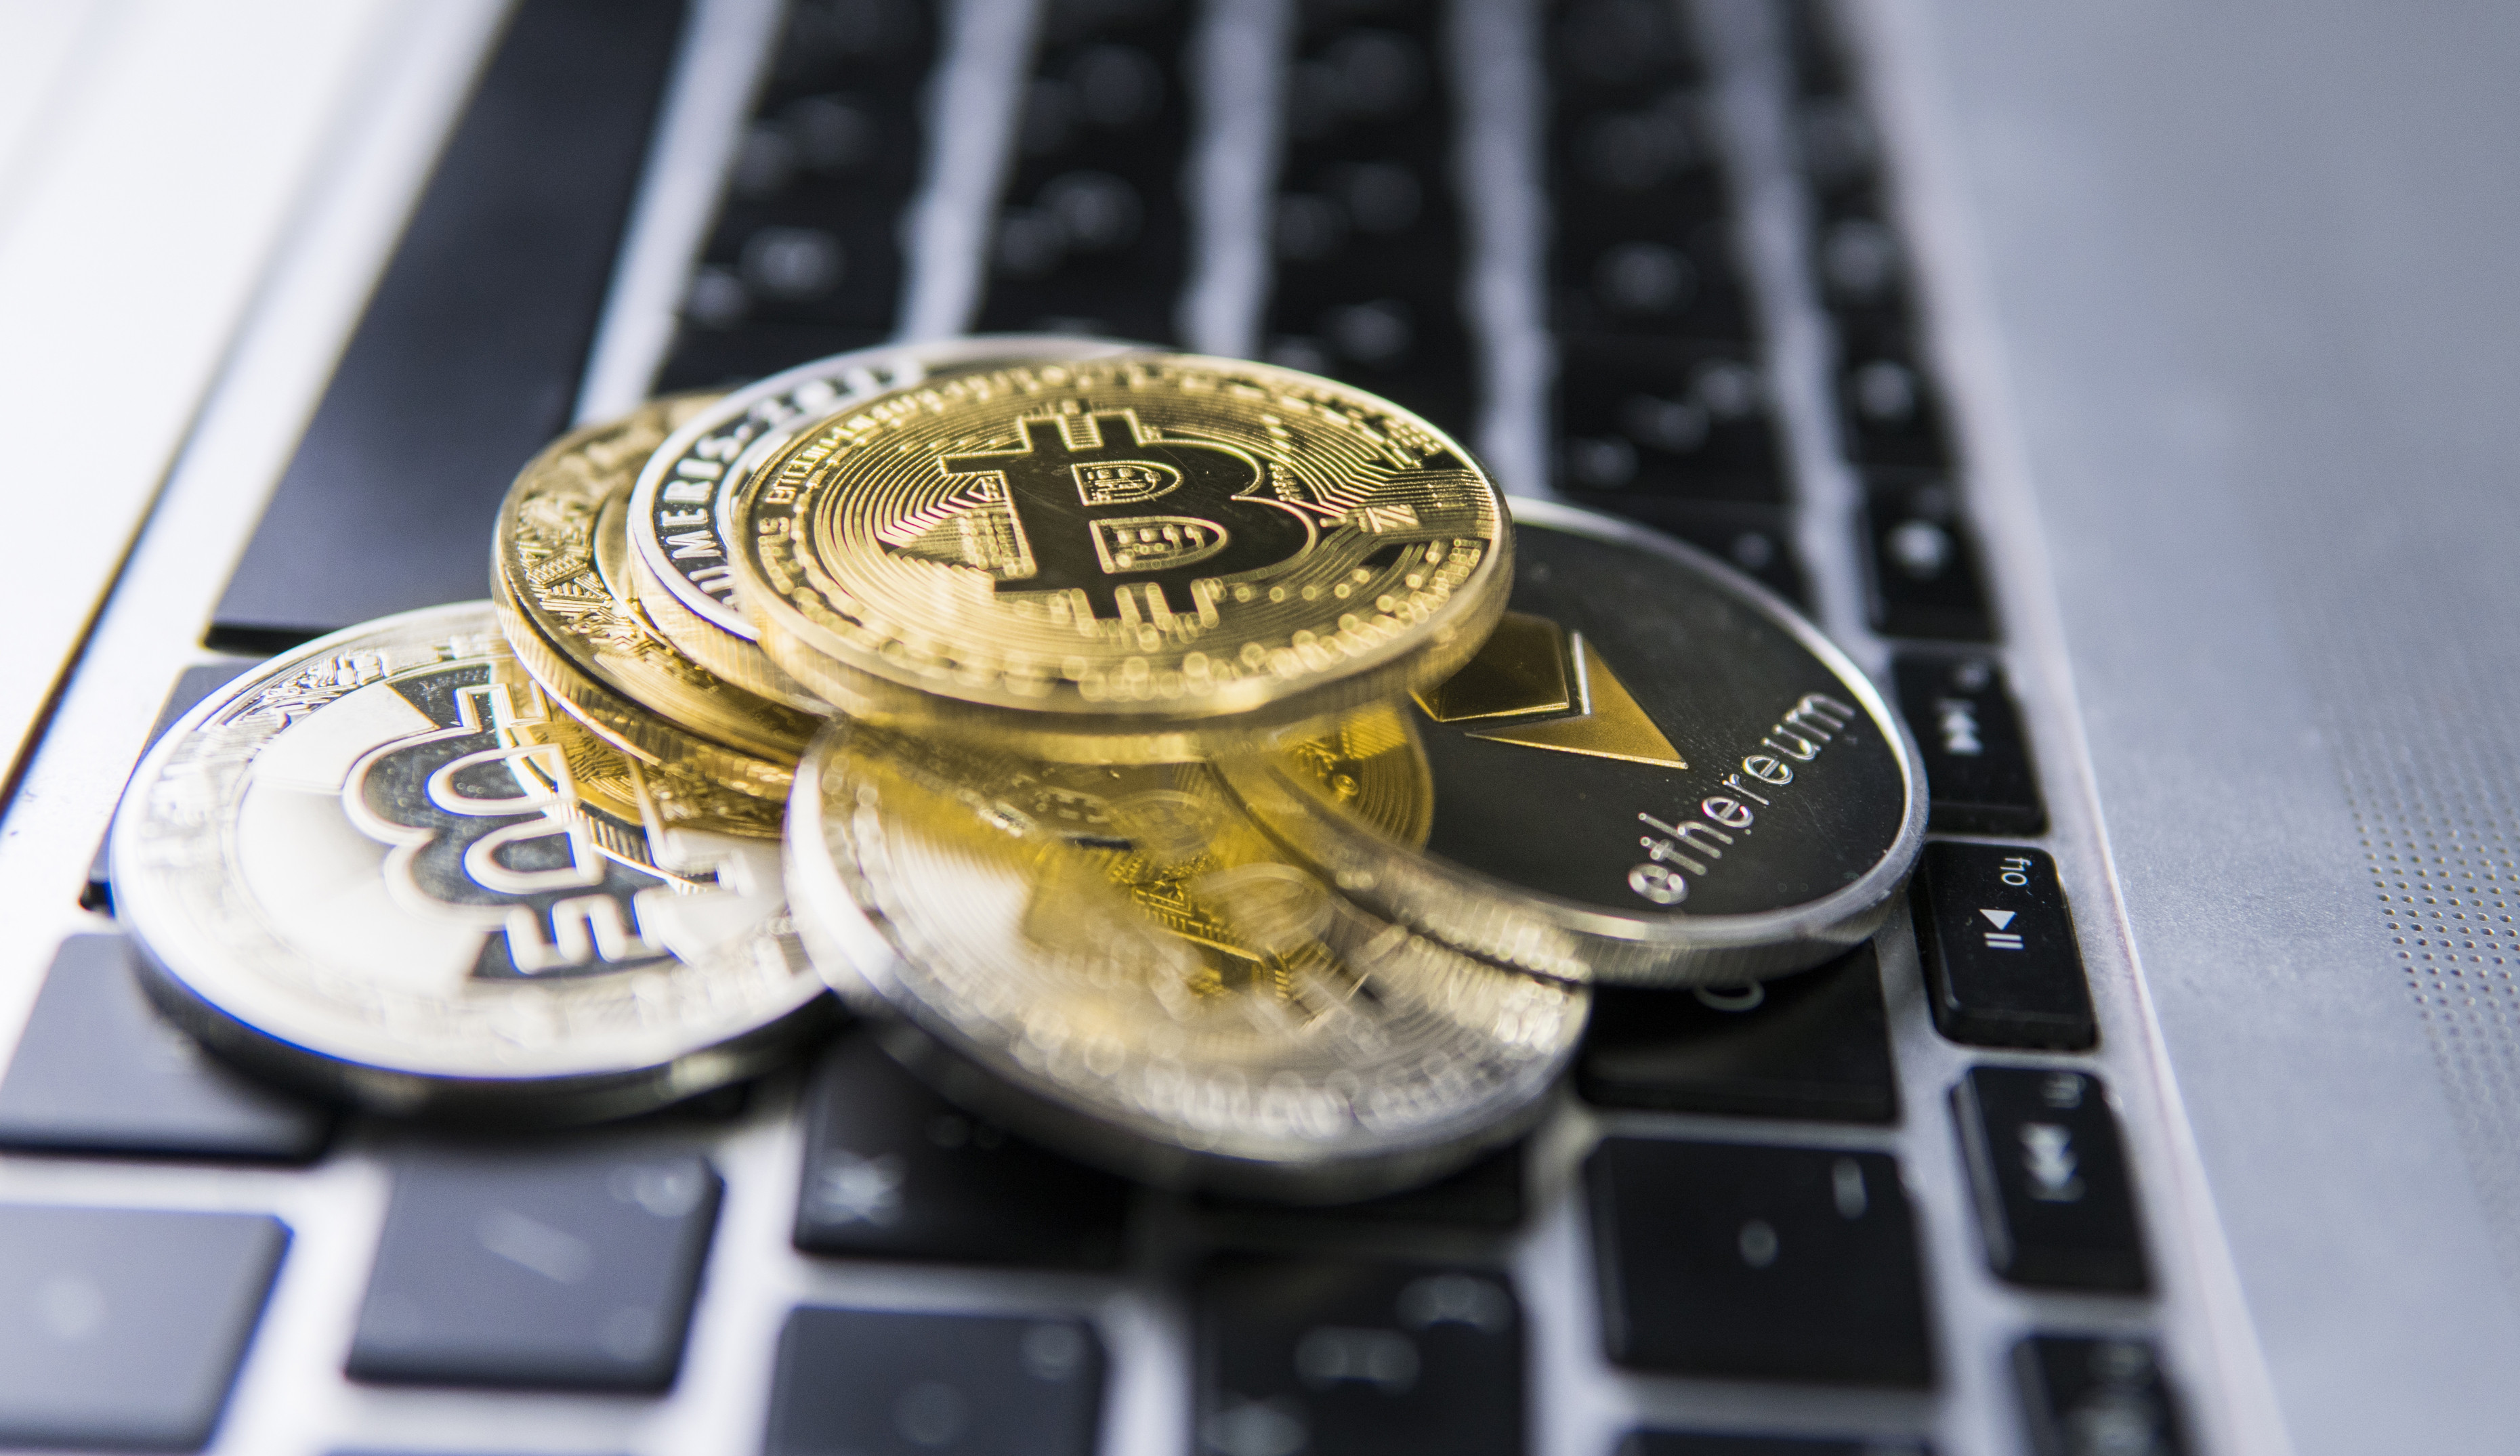 Bitcoin, ether and other cryptocurrencies should be regulated as gambling given the significant risks they pose to consumers, a panel of UK lawmakers said in a report on Wednesday. Photo: TNS